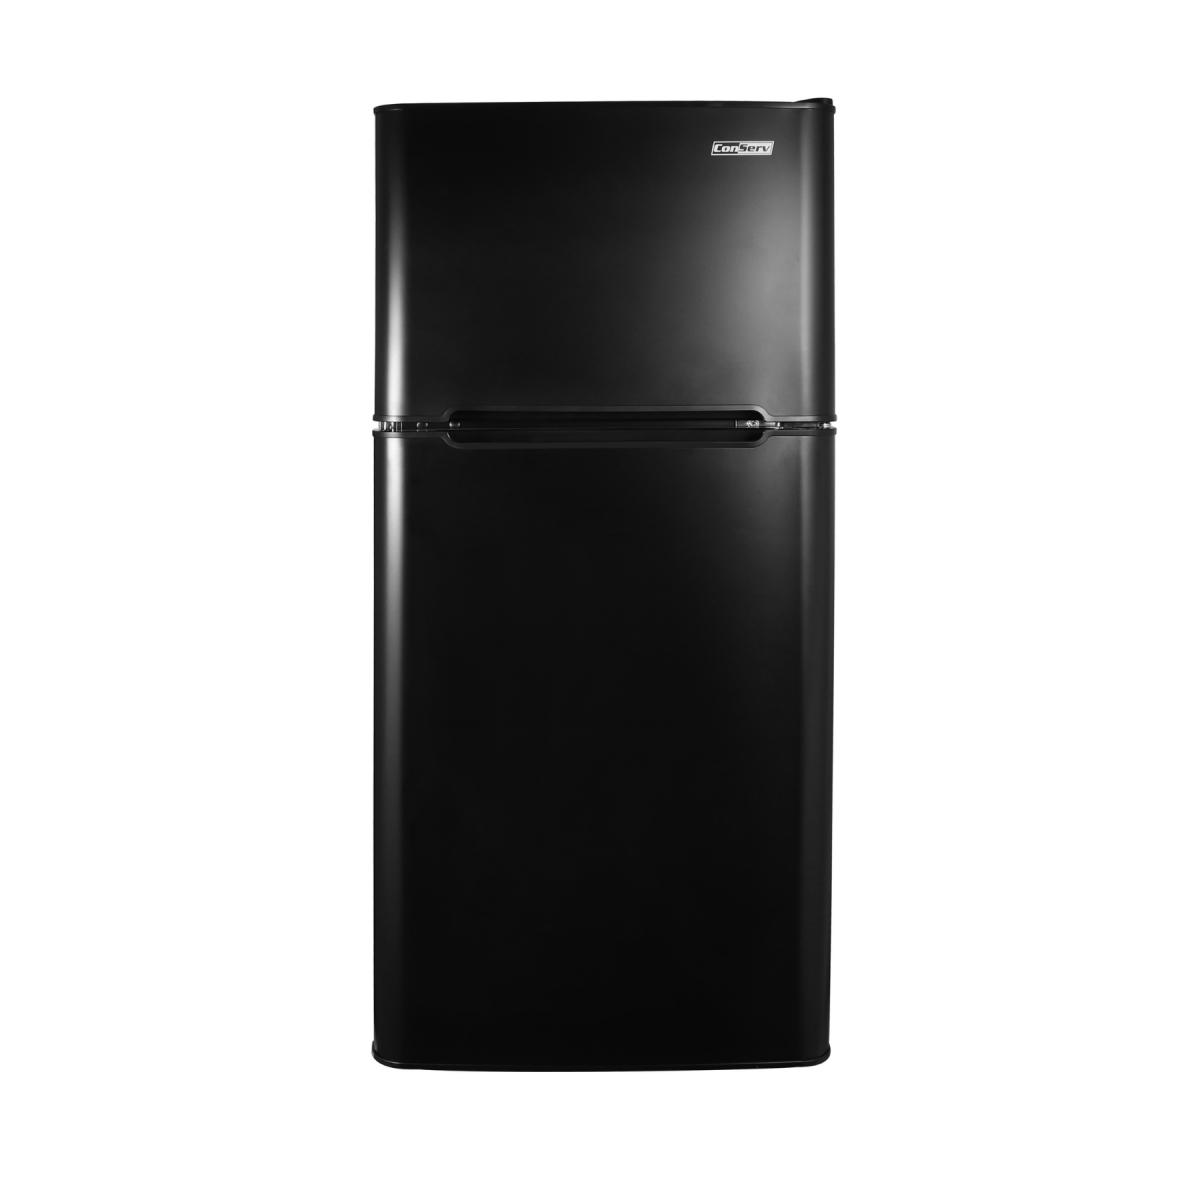 Picture of Conserv CRF 450 B ConServ 4.5cu.ft 2 Door Mini Freestanding Refrigerator with Freezer in Black